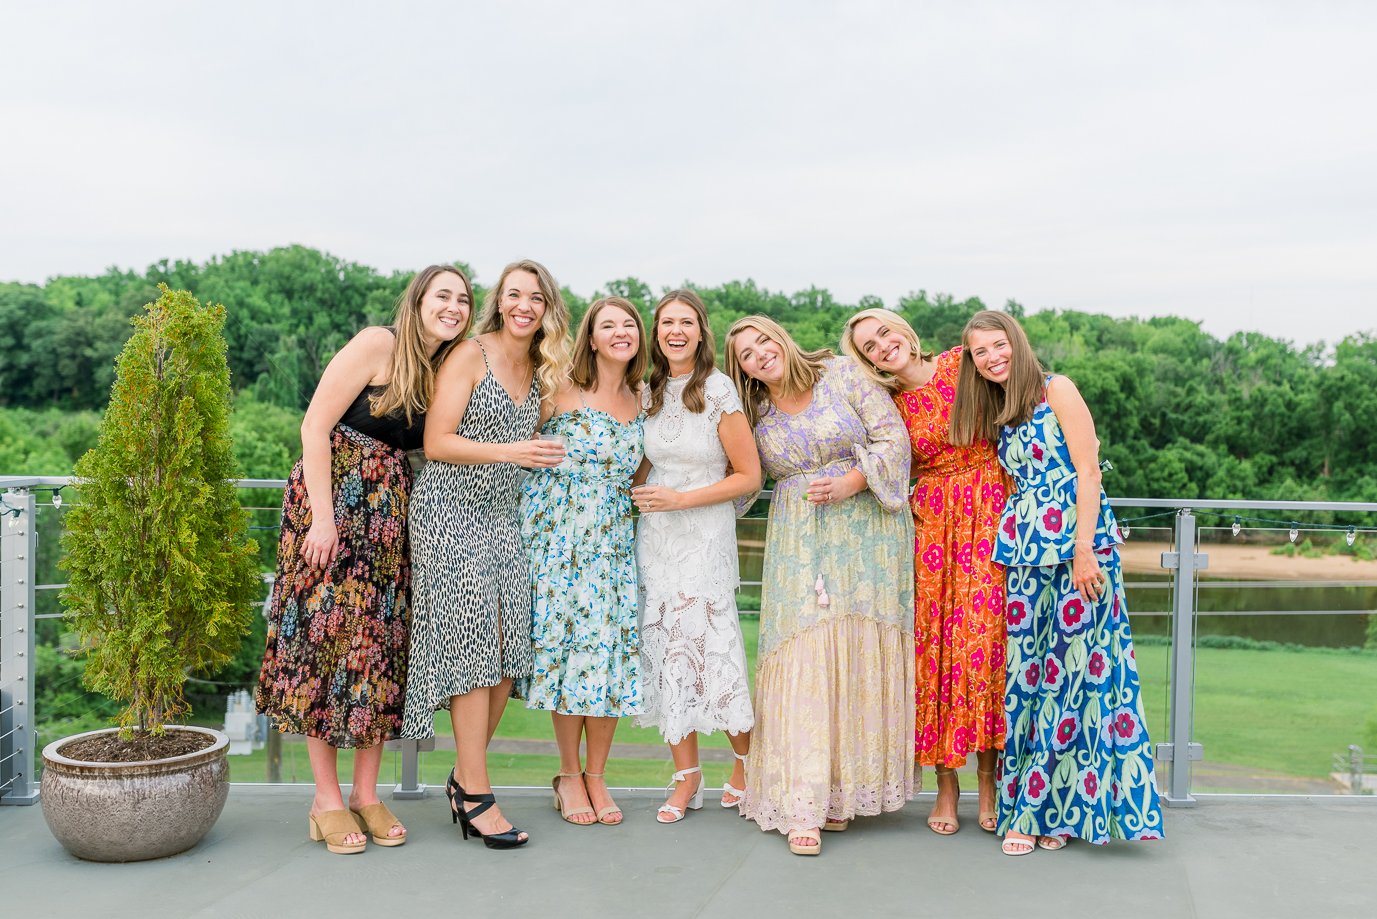 WoolenMill_TheSIlkMill_FredericksburgWeddingVenue_DowntownFredericksburg_VirginiaWeddingVenue_Event_BridalShow2023_youseephotography_pic7.jpg